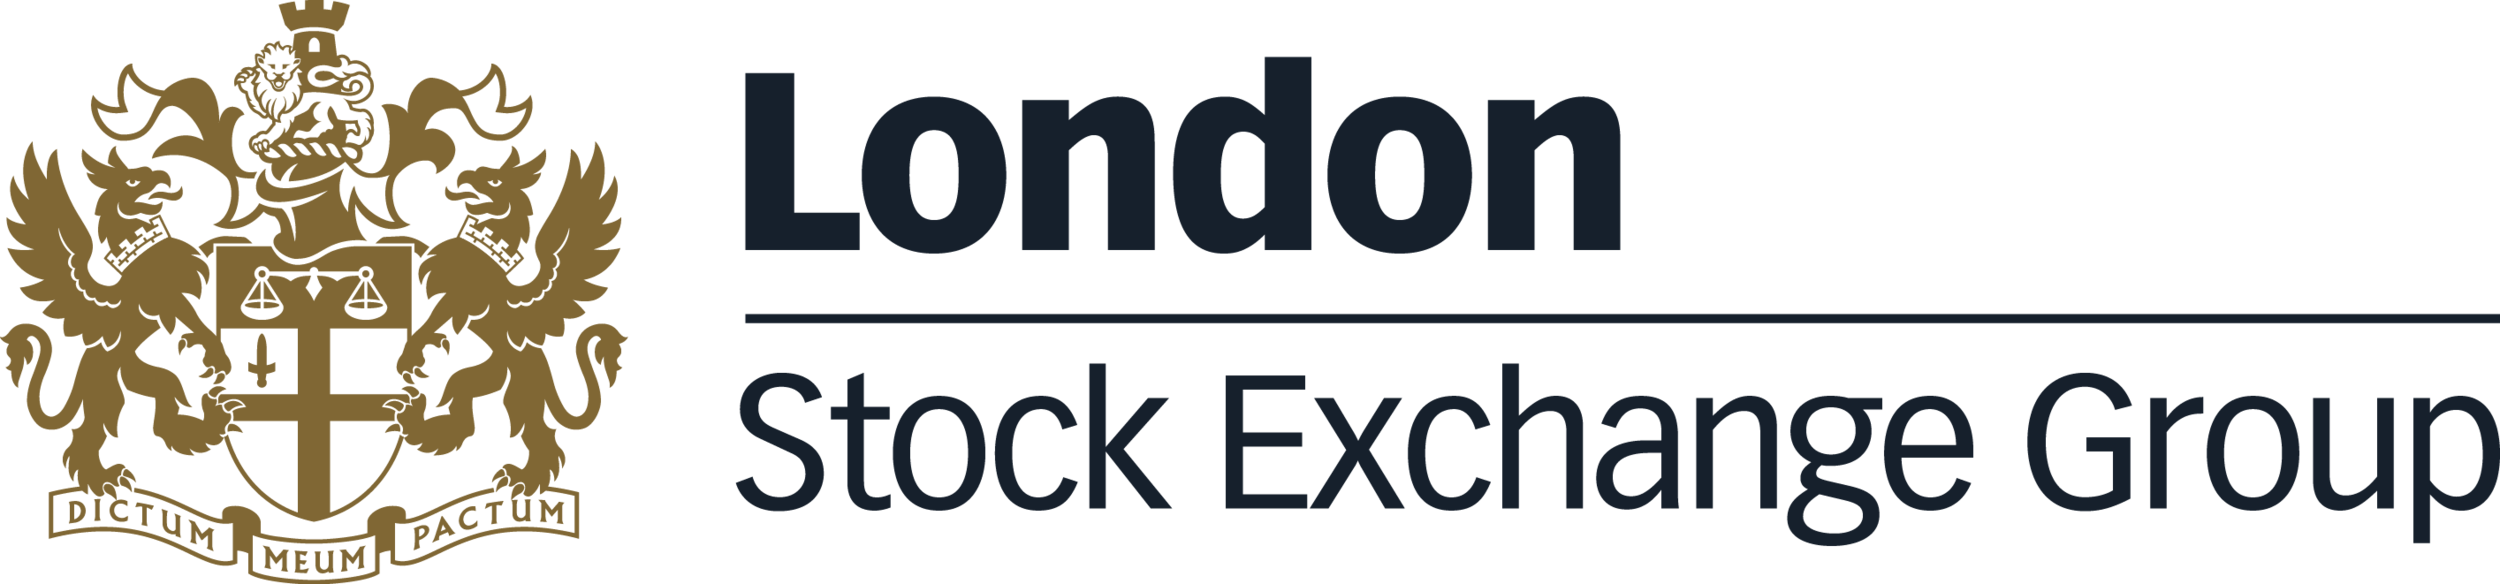 London Stock Exchange Group.png